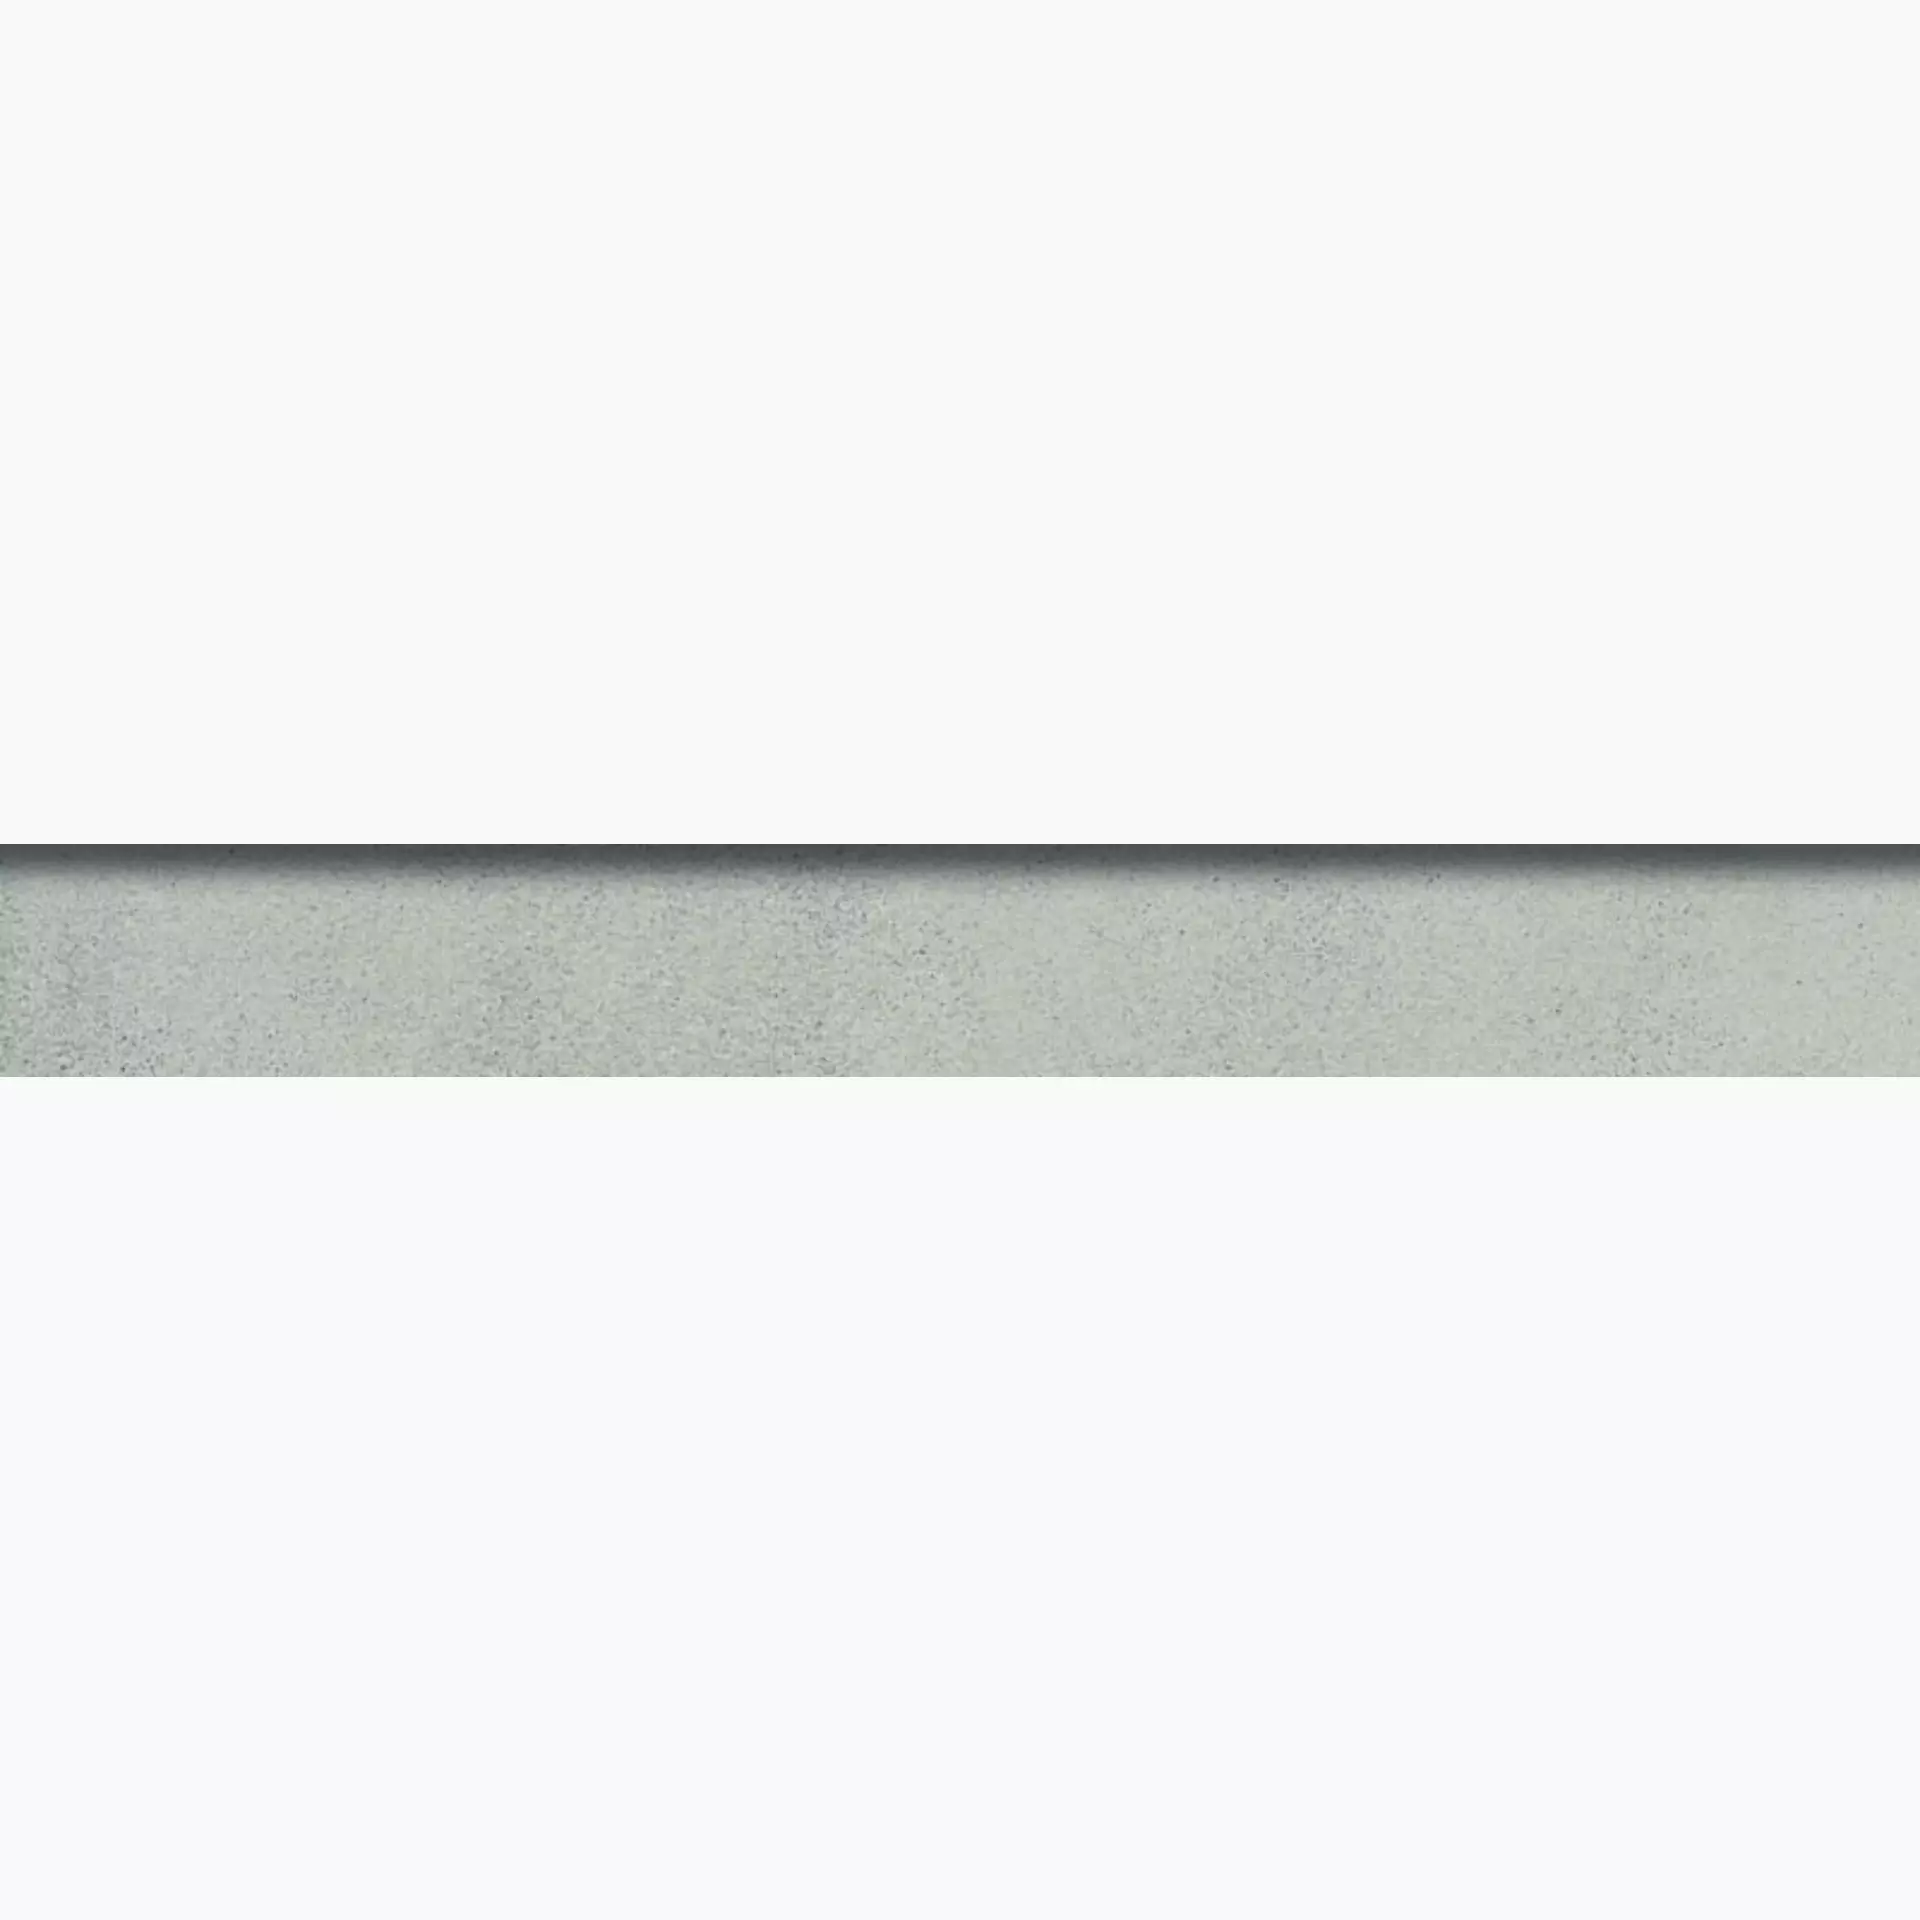 Sant Agostino Sable Pearl Natural Skirting board CSABSAPE90 7,3x90cm rectified 10mm